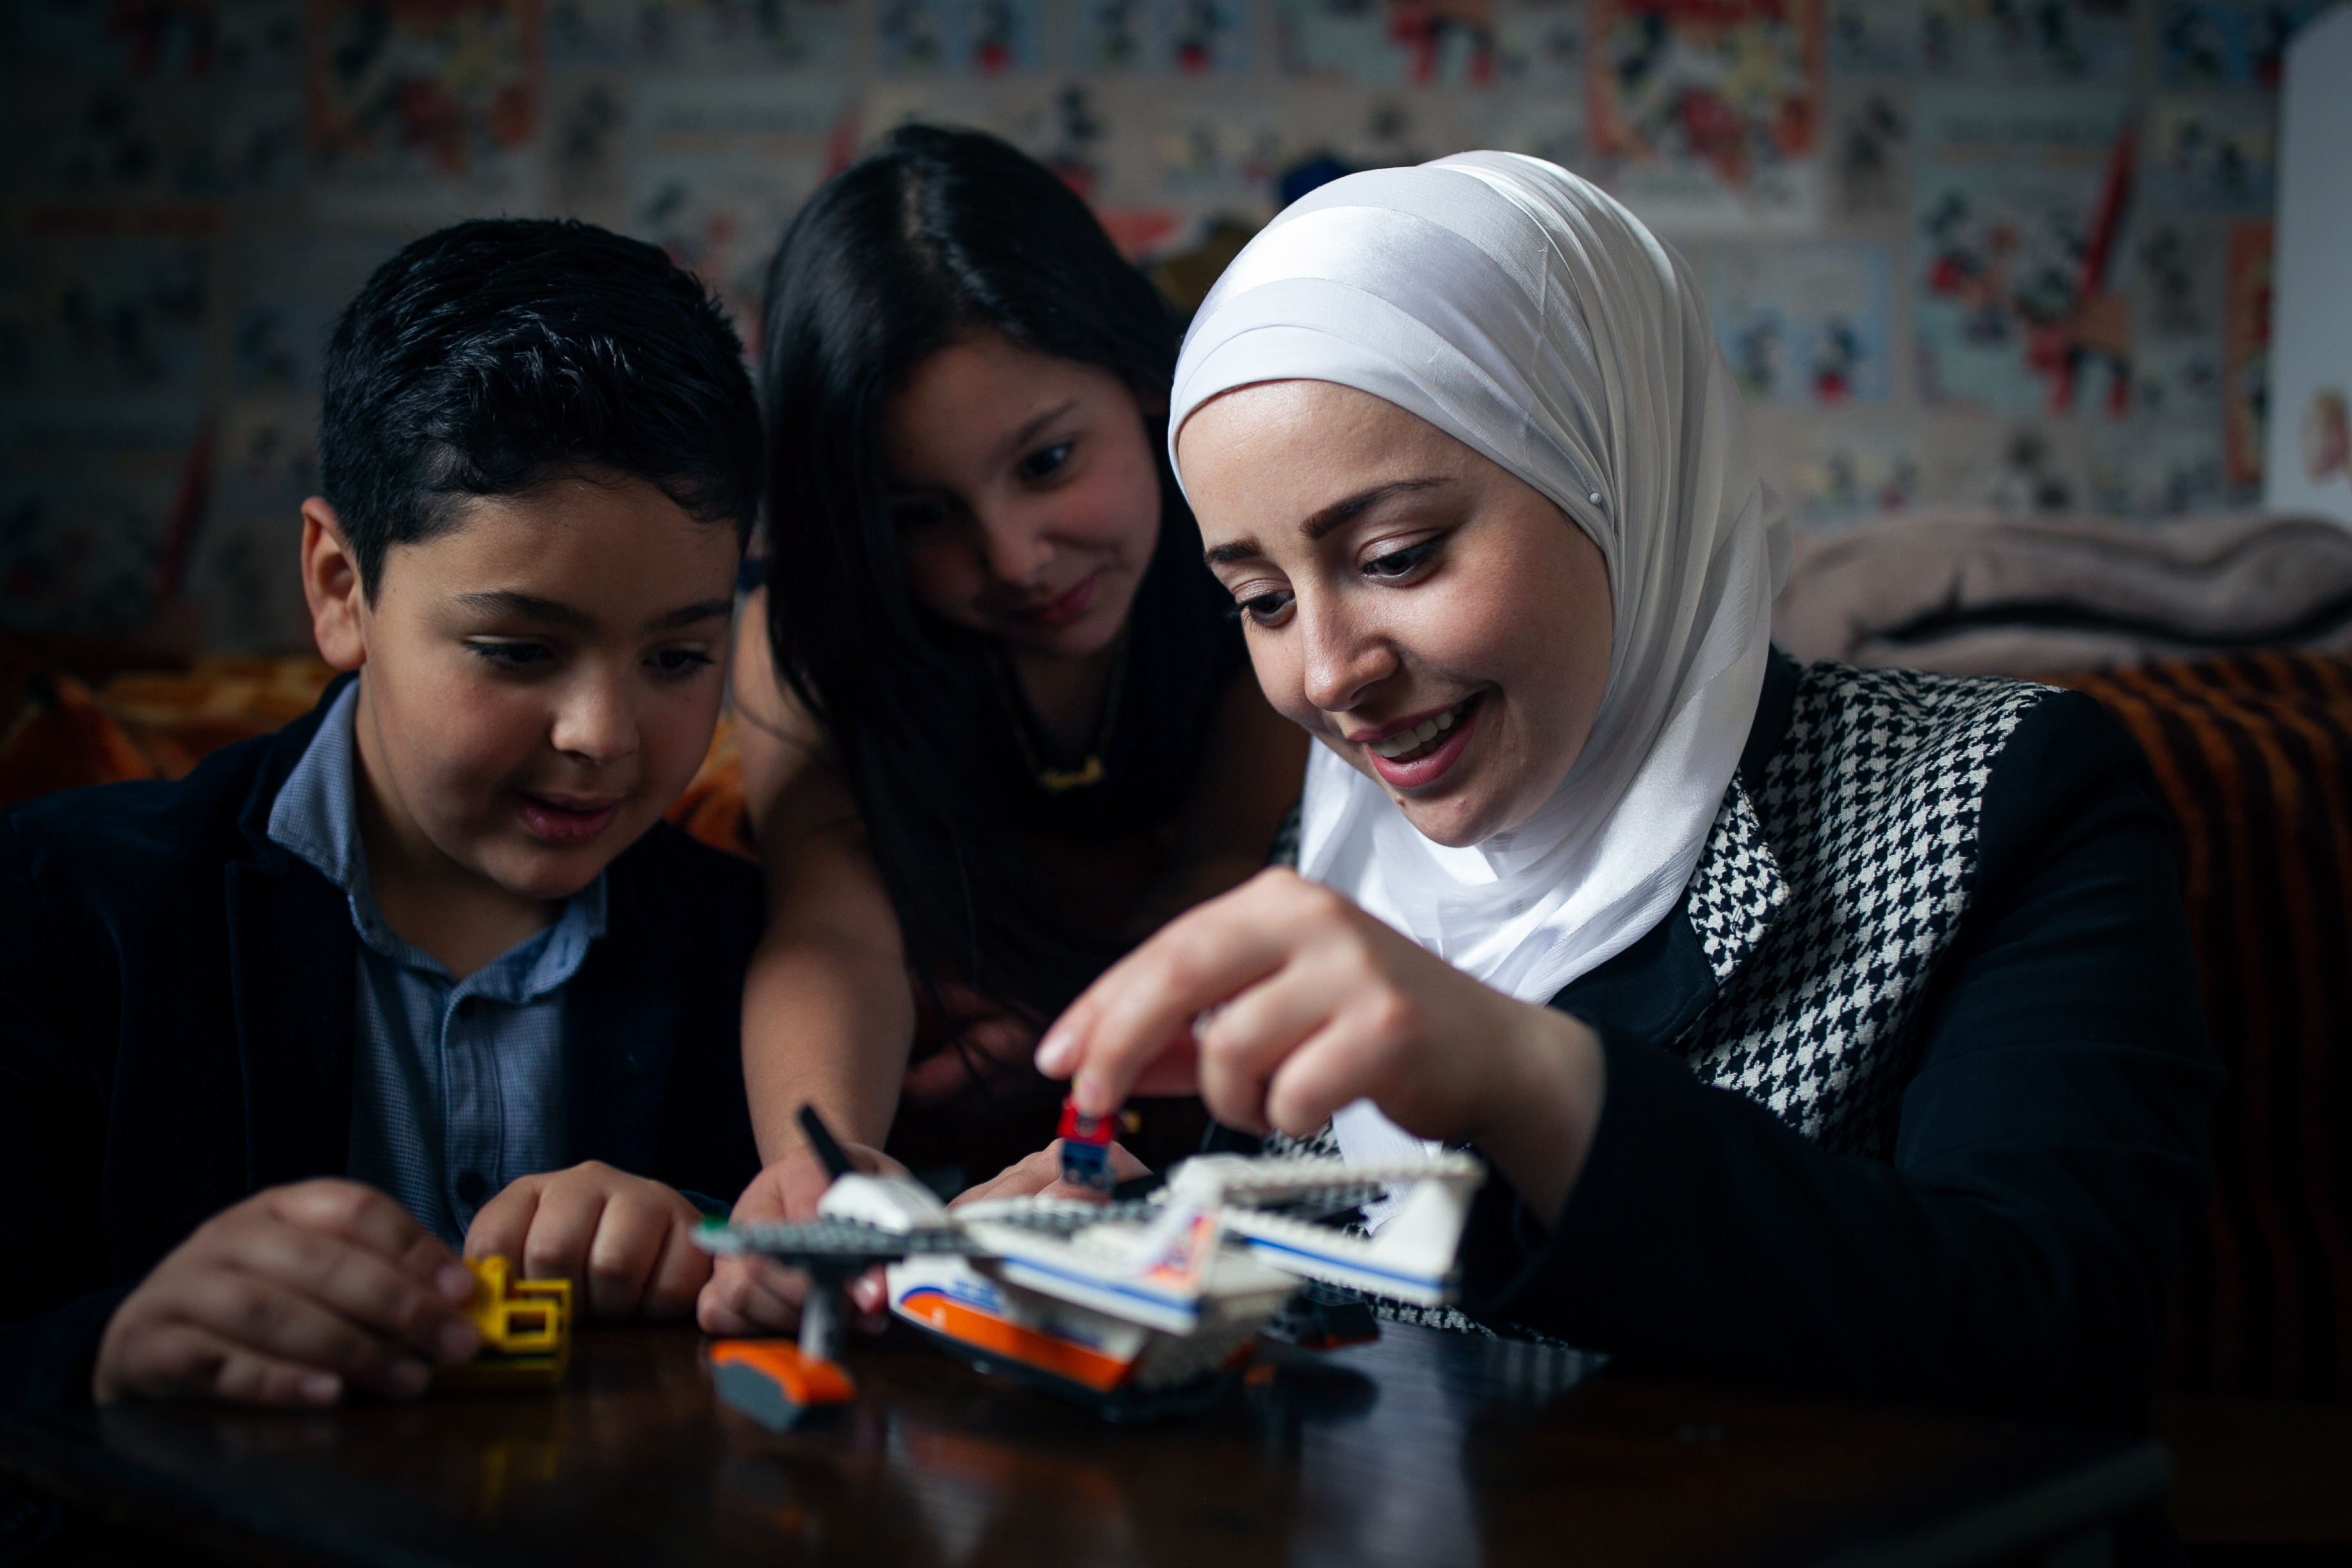 Rana, Feras and Sara have built a new life in Hamilton after leaving war-torn Syria three years ago